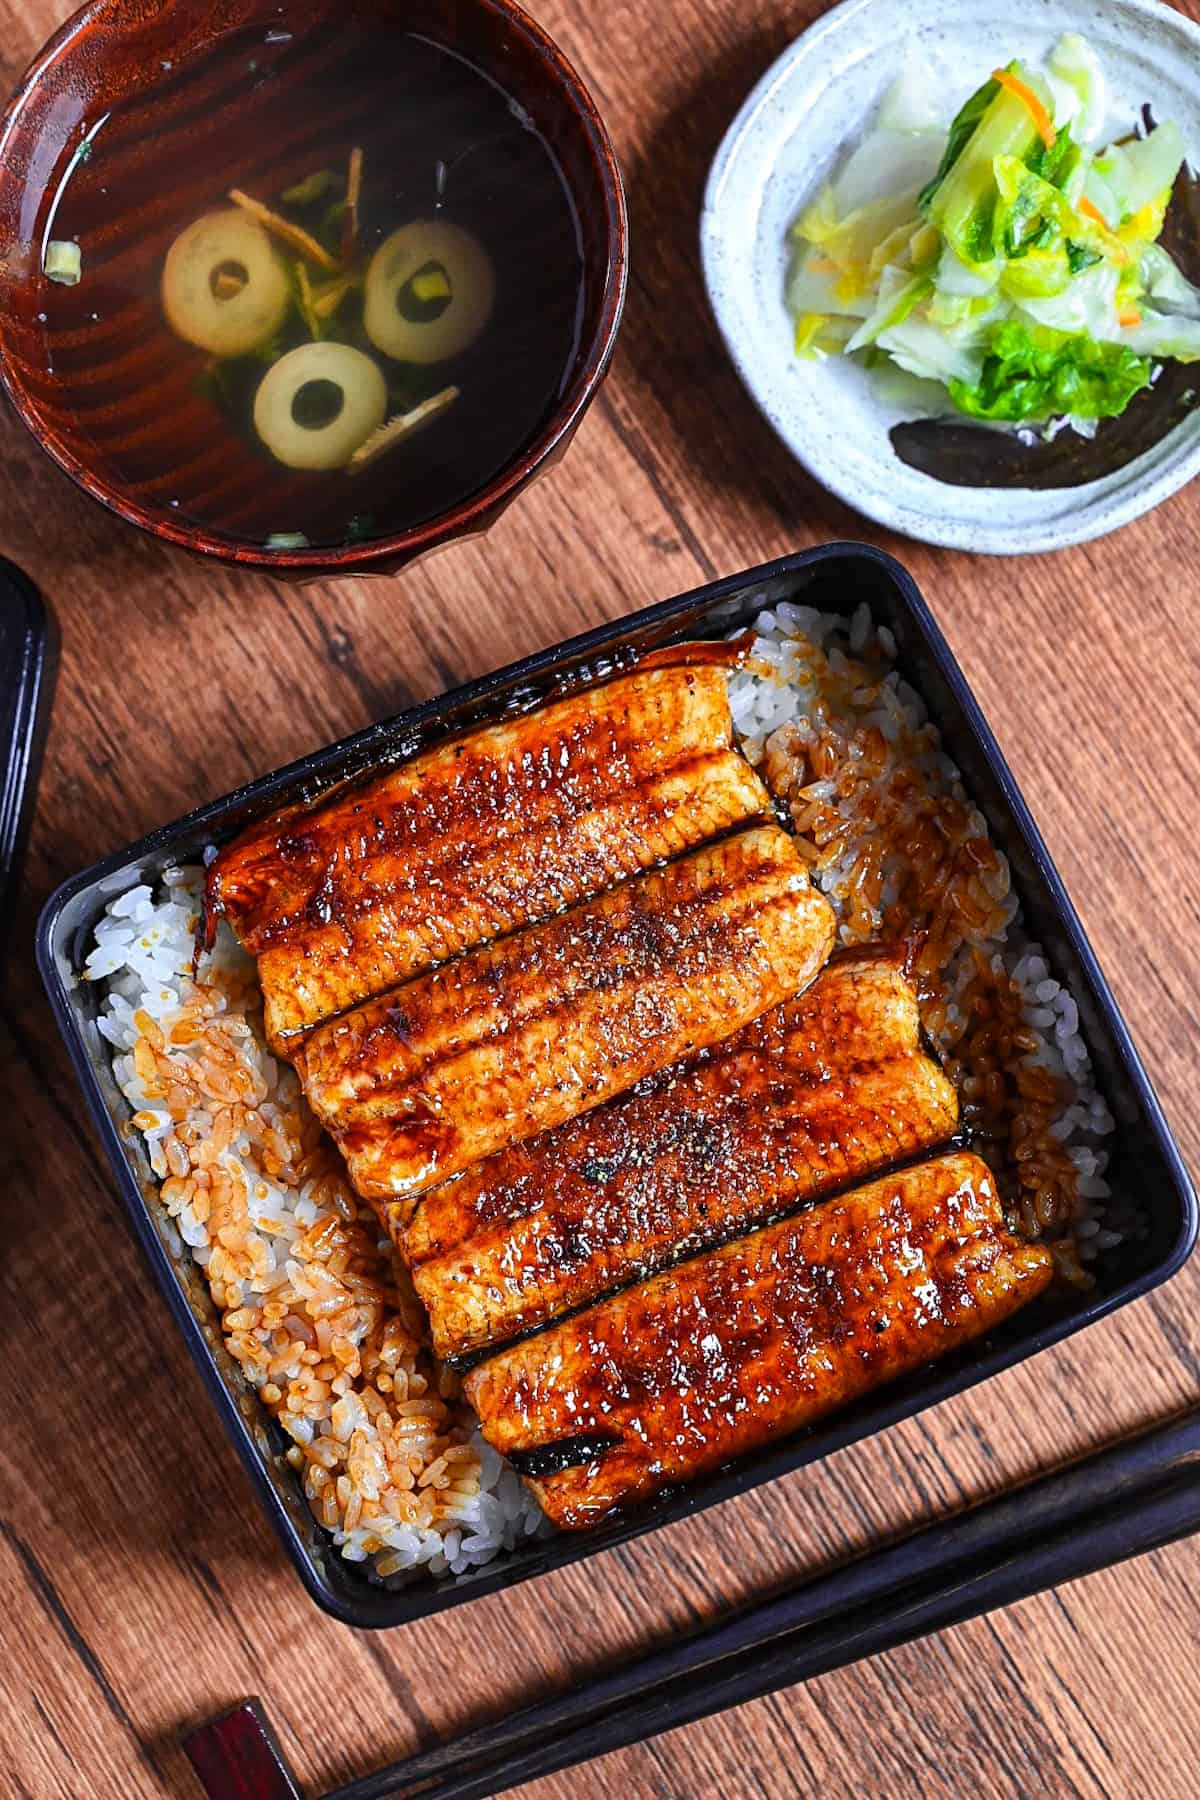 grilled eel coated with homemade unagi sauce and sprinkled with sansho pepper served over rice in a black lacquerware box (unaju) with a plate of pickles and bowl of clear soup